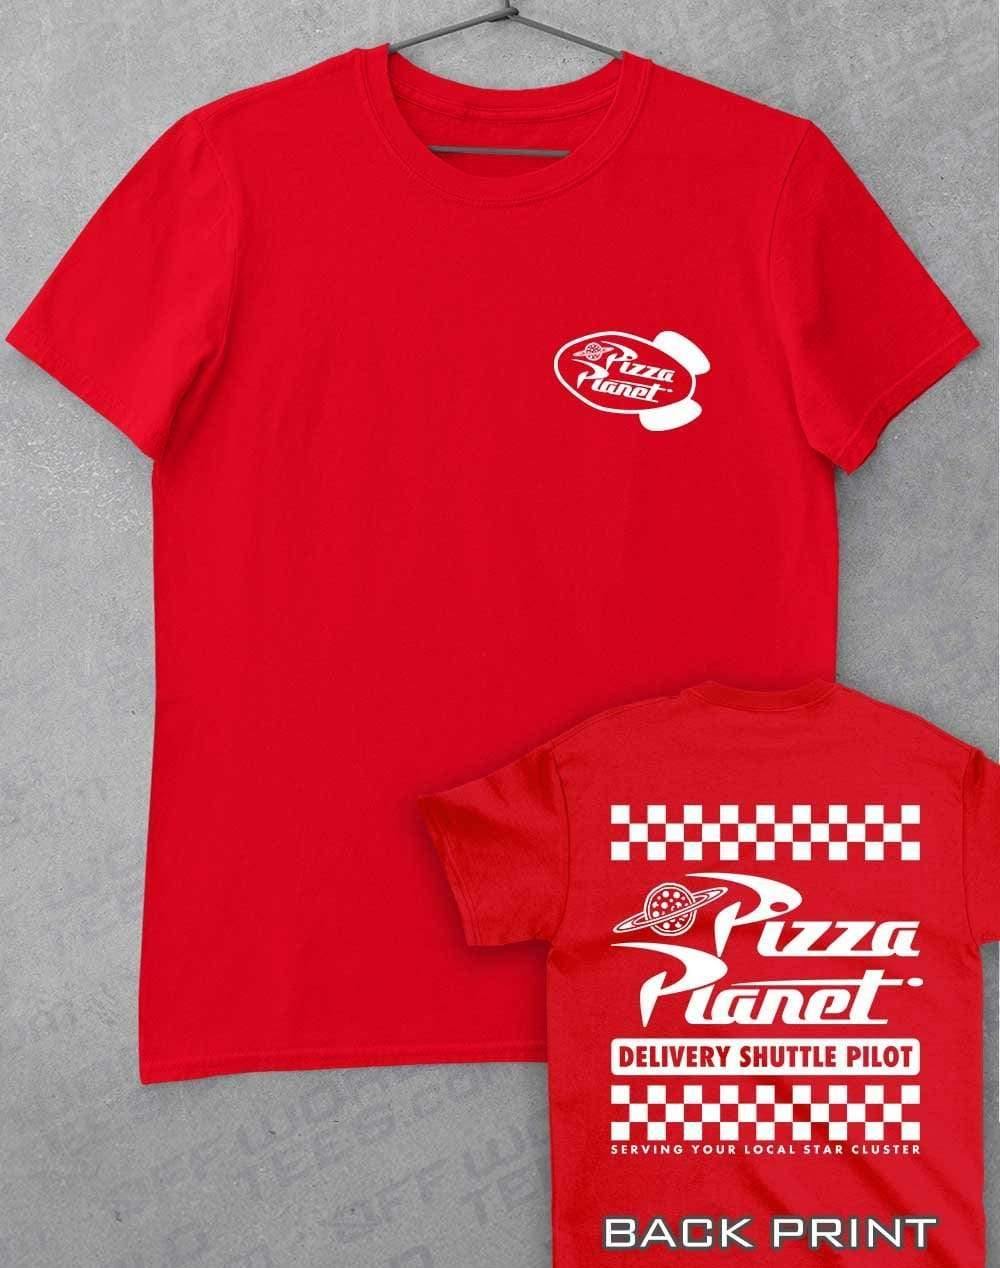 Pizza Planet Shuttle Pilot with Back Print T-Shirt S / Cardinal Red  - Off World Tees